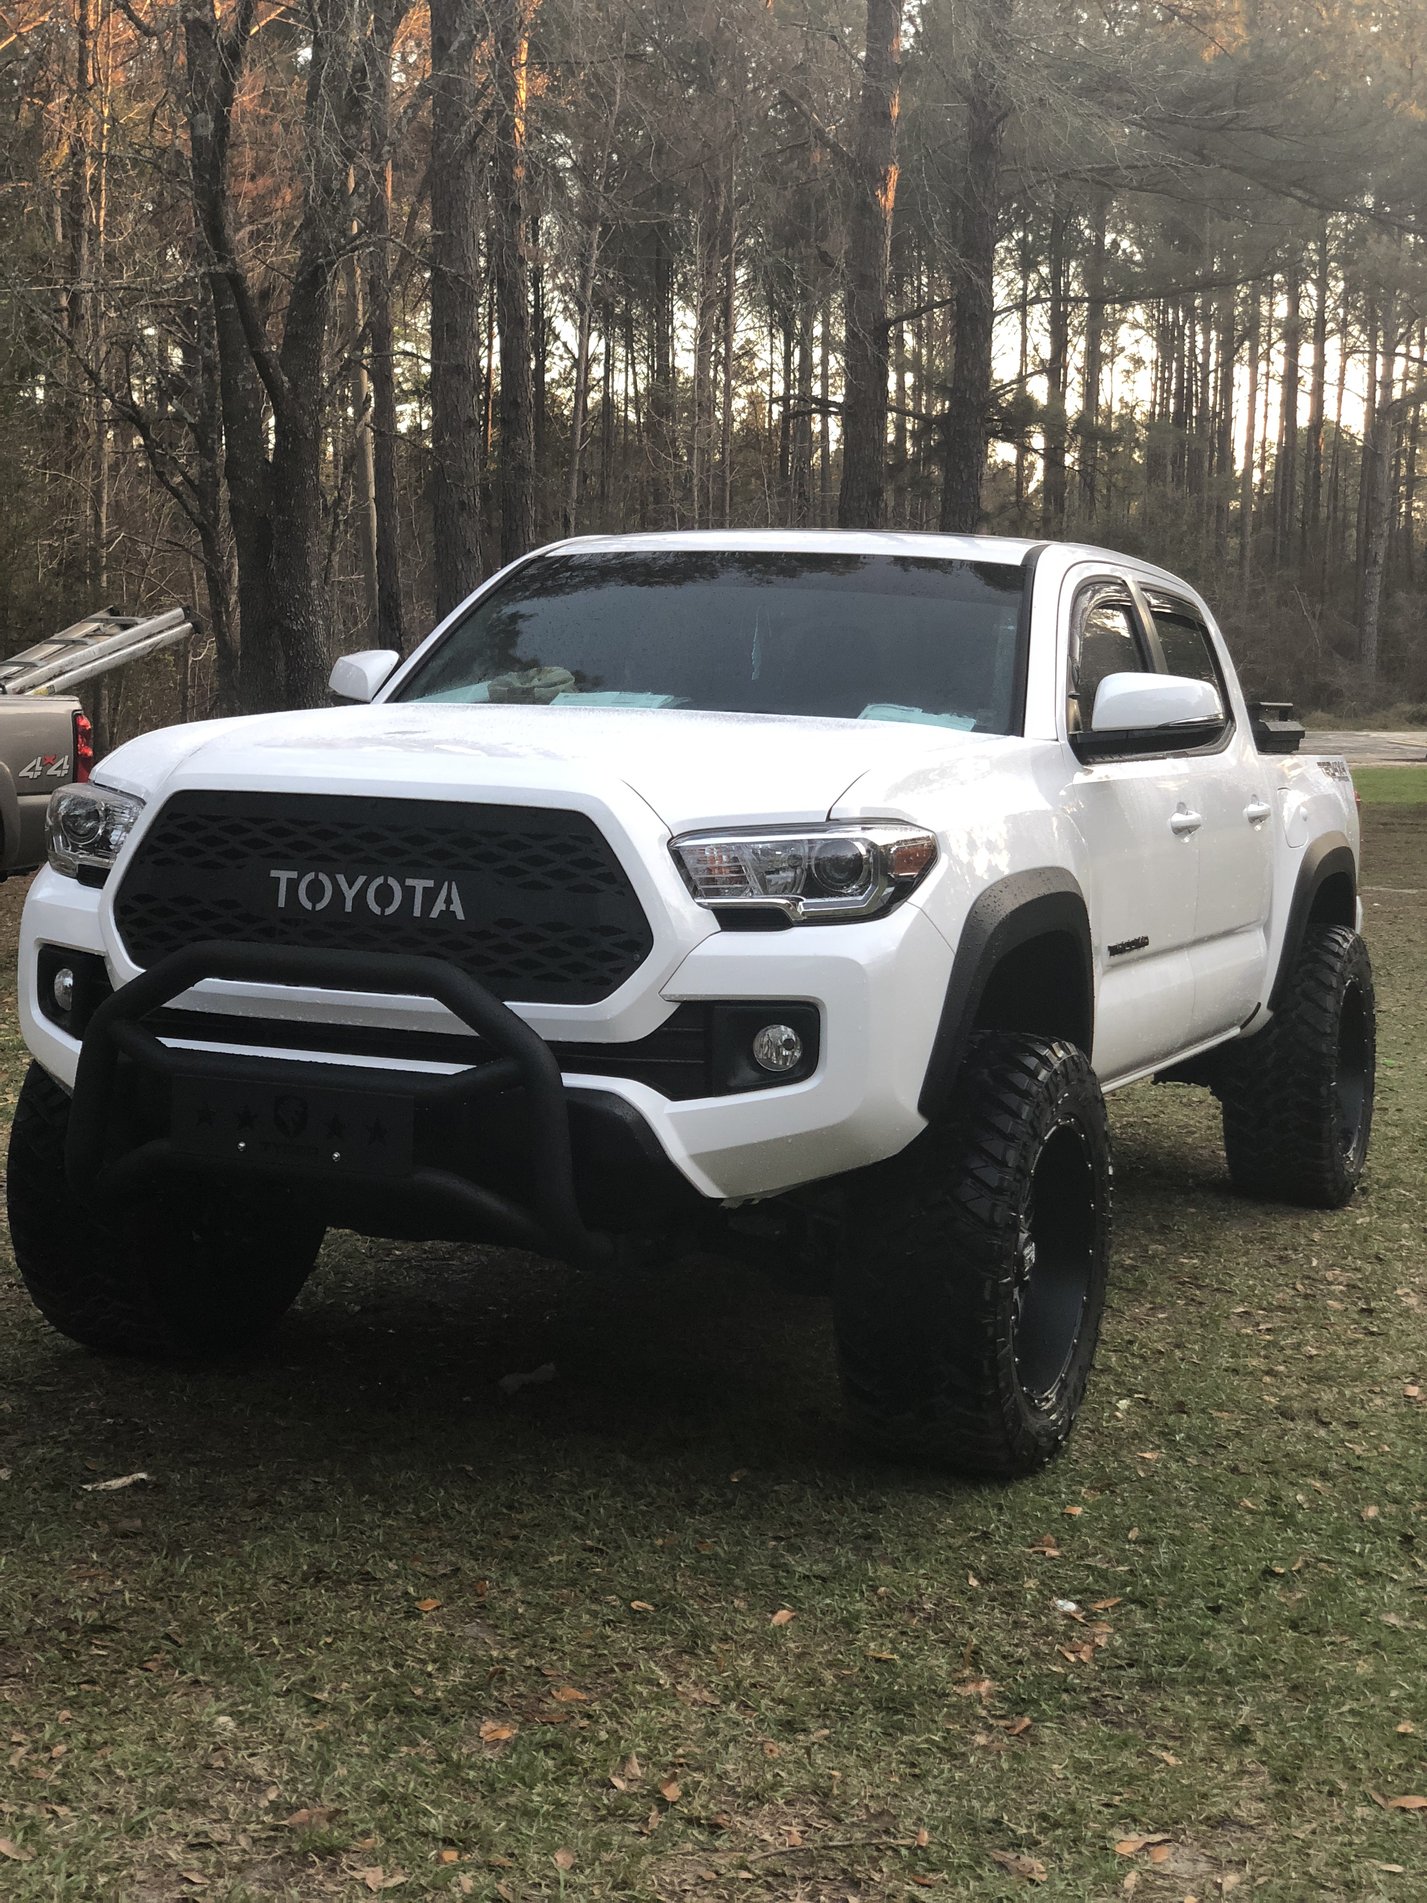 Empyre 2016 - 2017 Toyota Tacoma Grille Insert